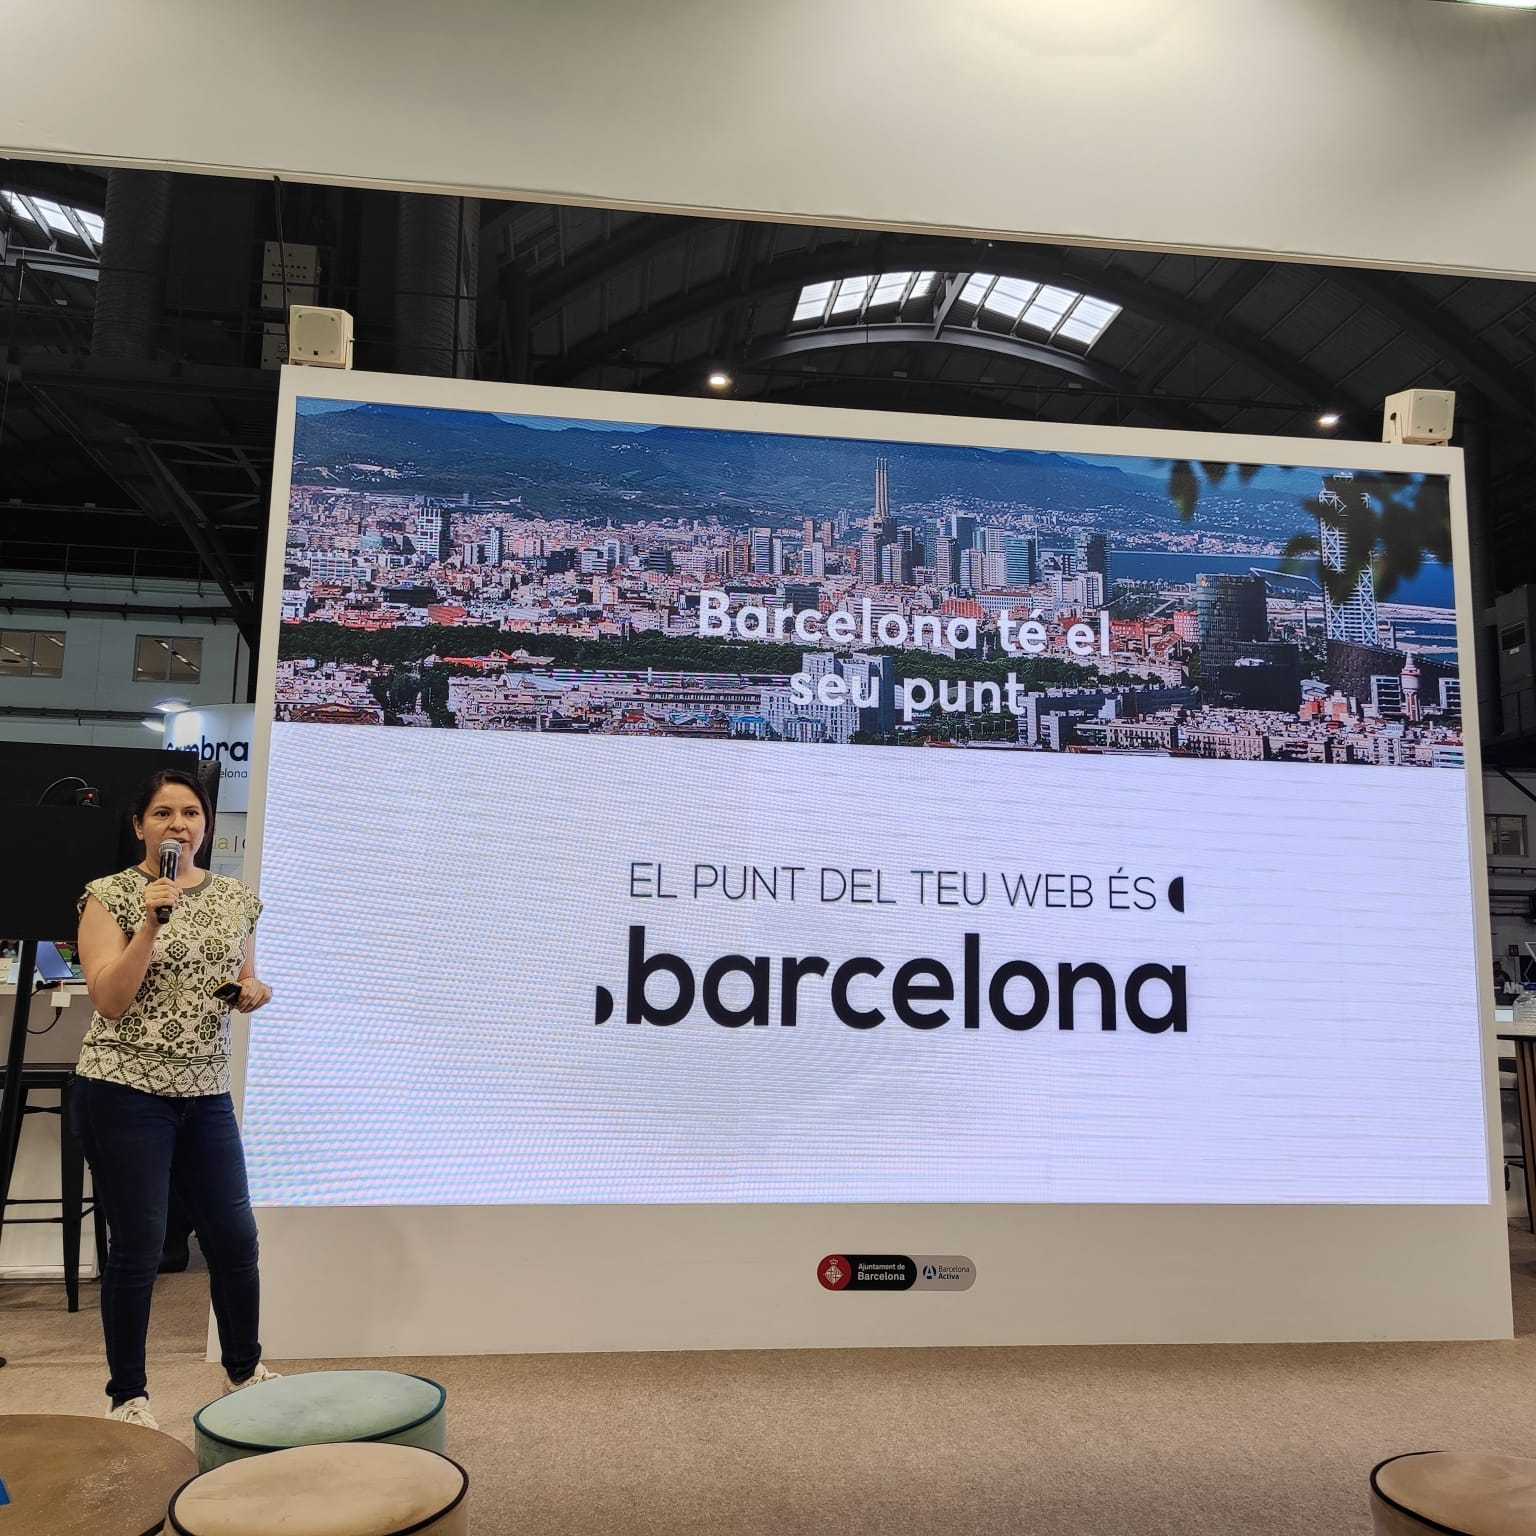 The .barcelona domain is successfully presented at Bizbarcelona